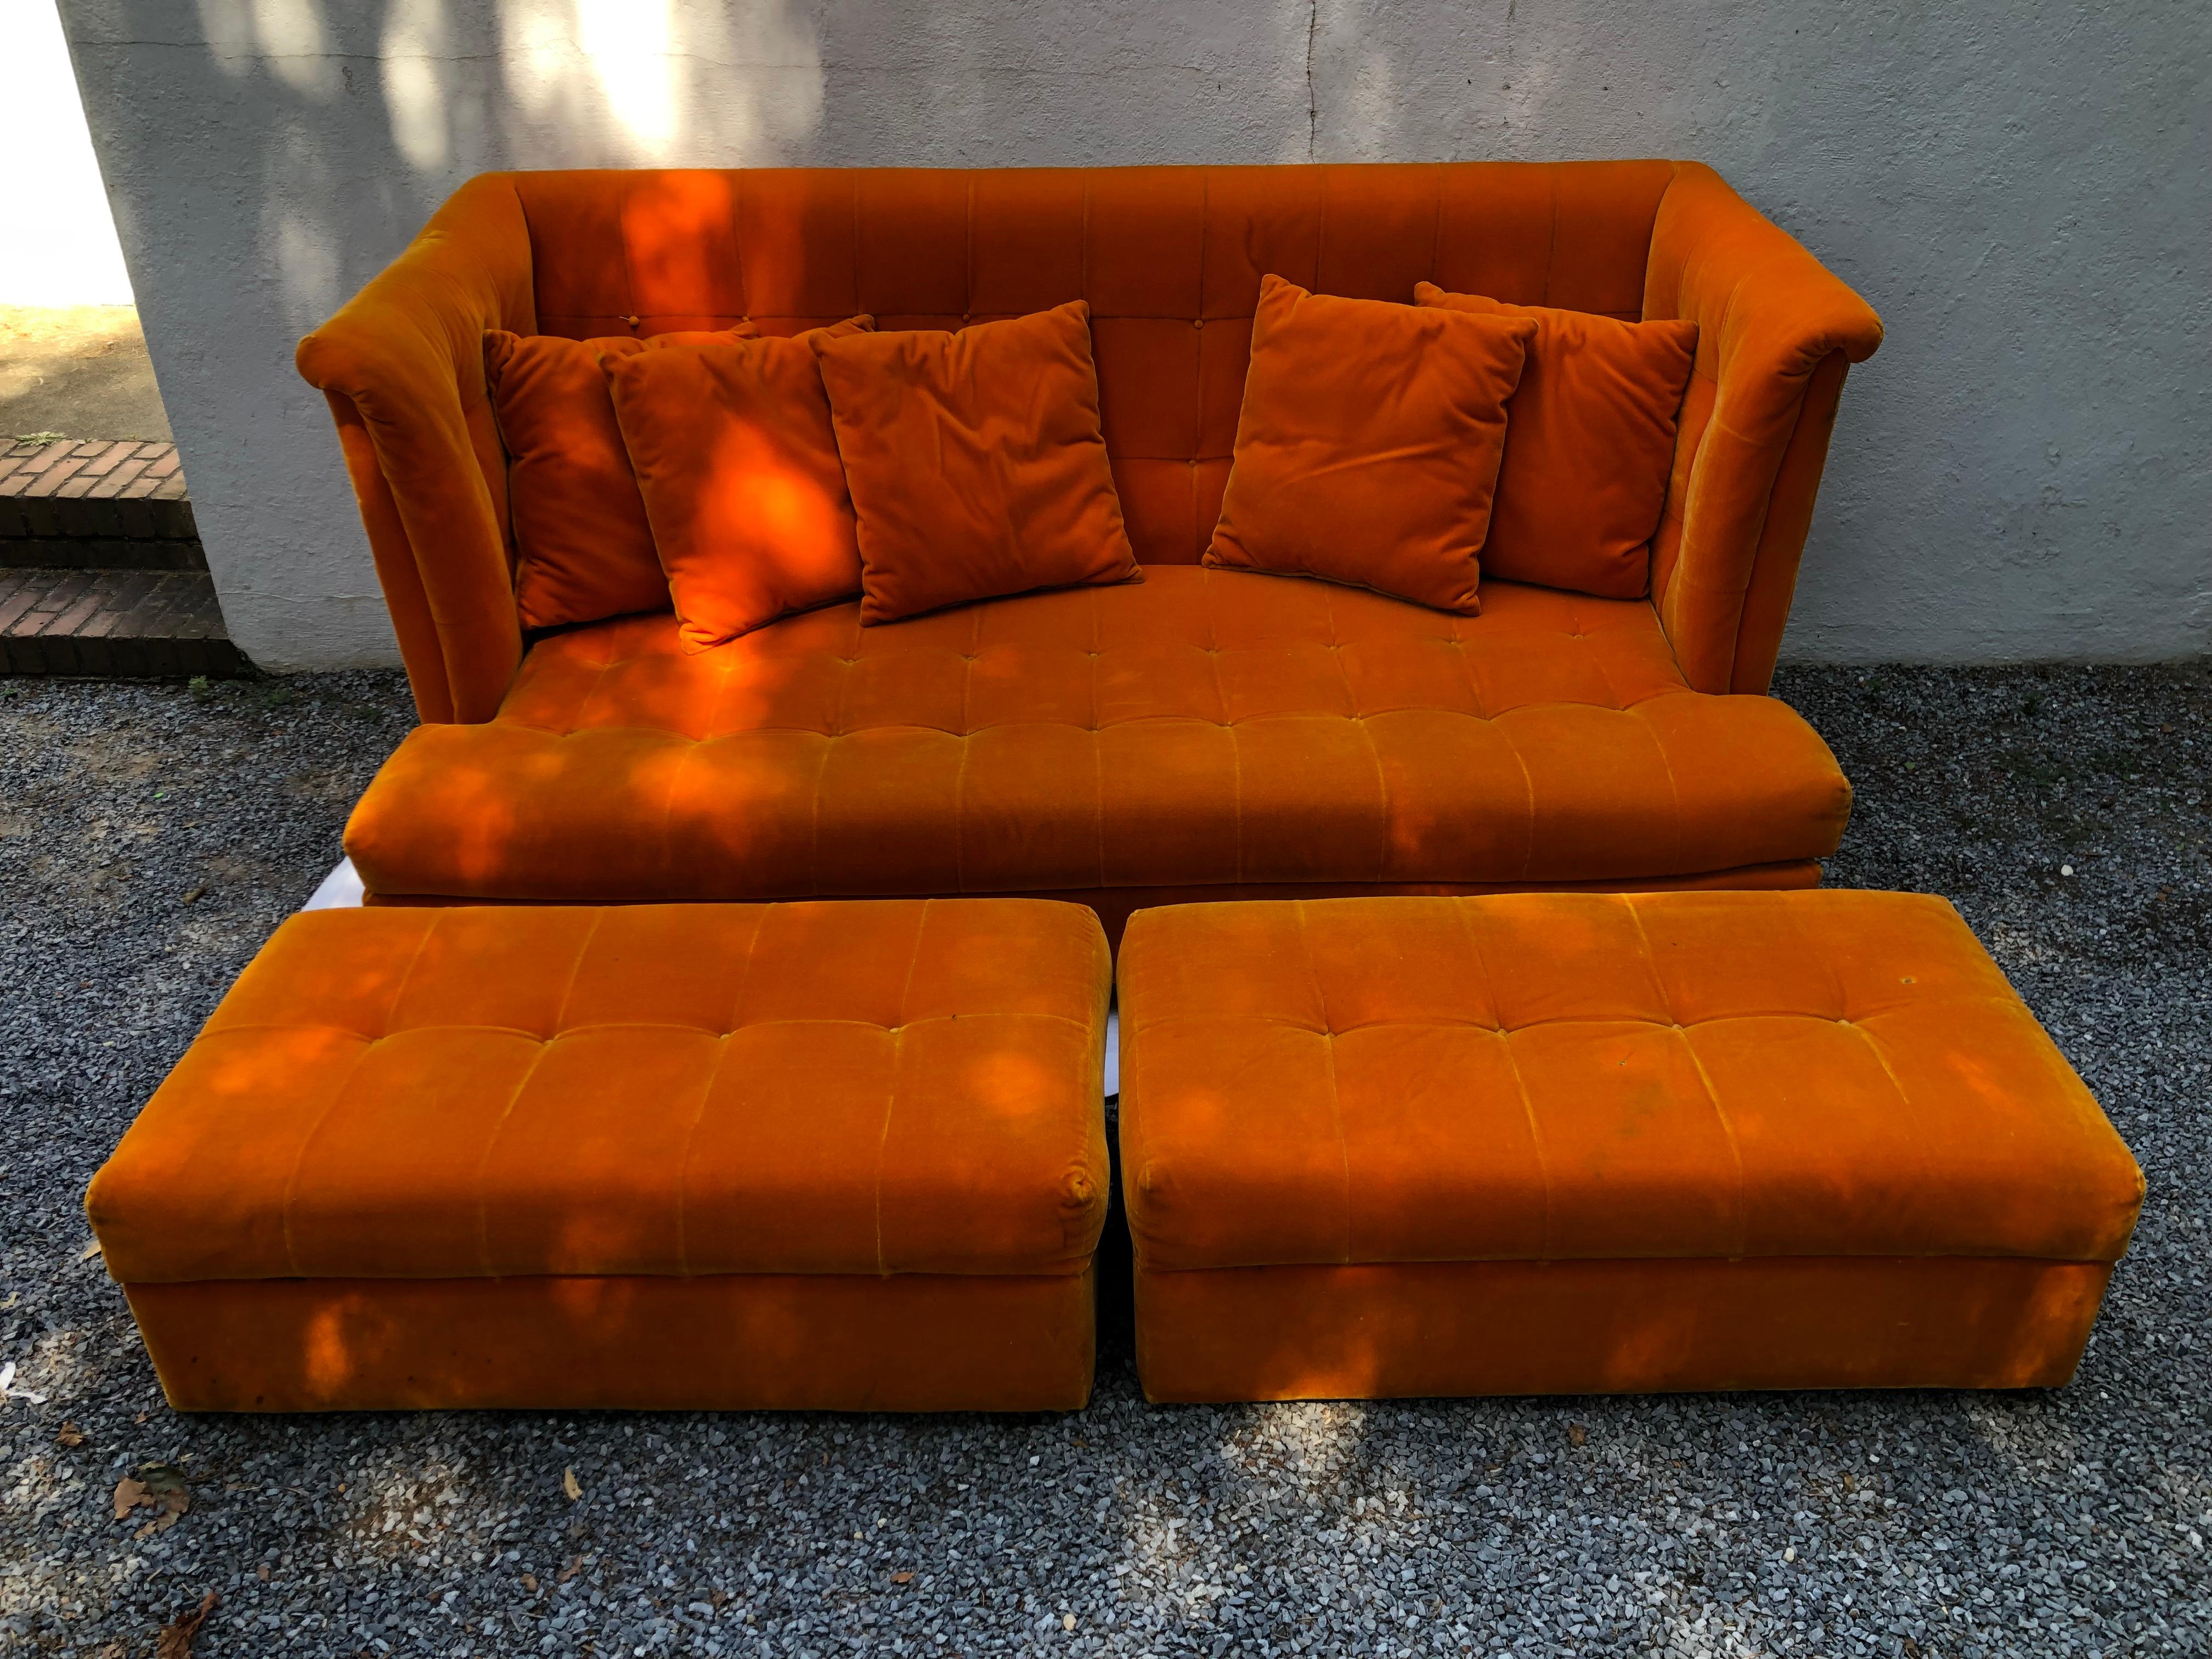 Shelter sofa and ottomans by Thayer Coggin for Milo Baughman... ready for a second life with your own new upholstery.